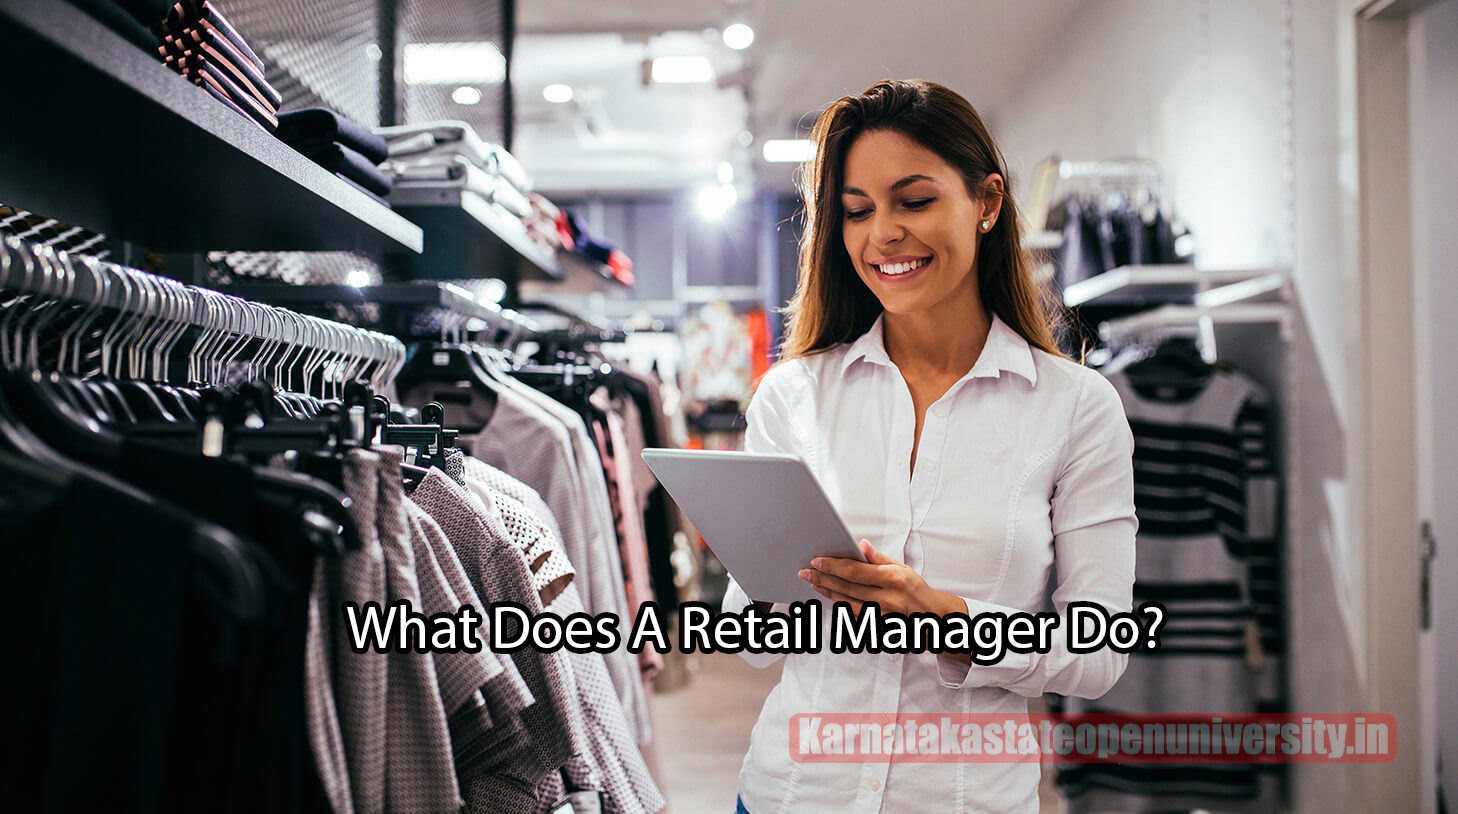 What Does A Retail Manager Do?